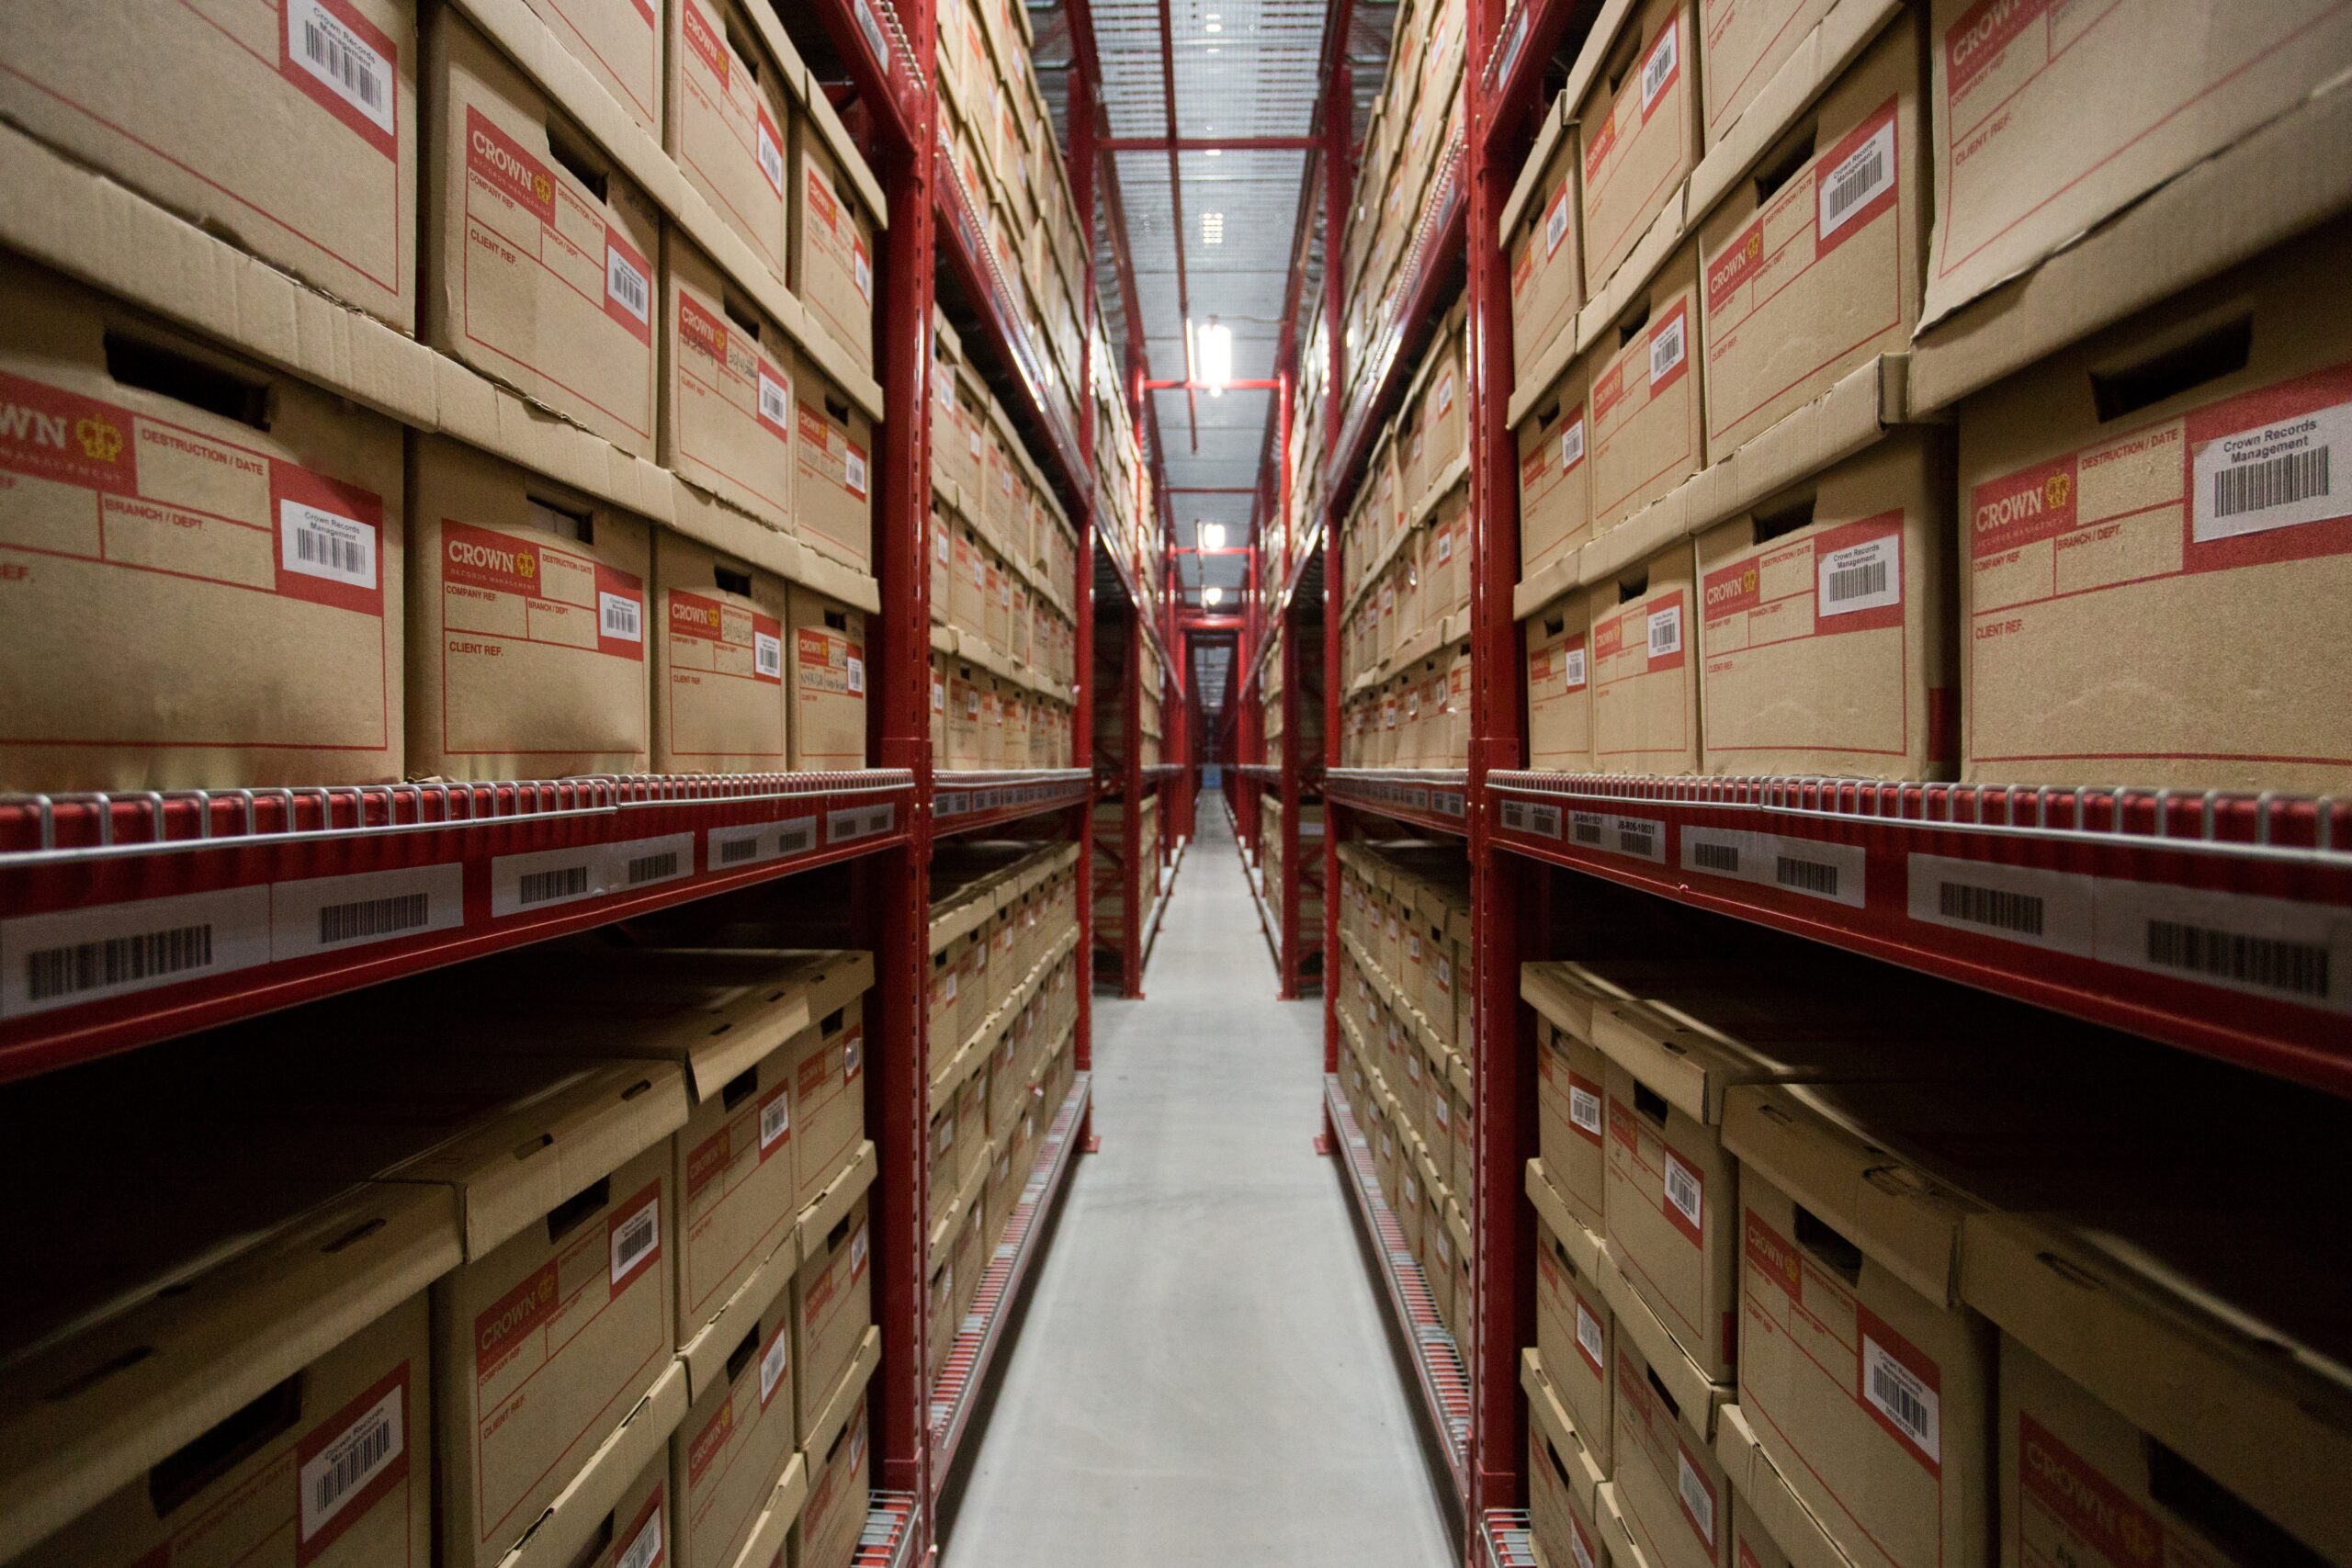 Commercial storage solutions